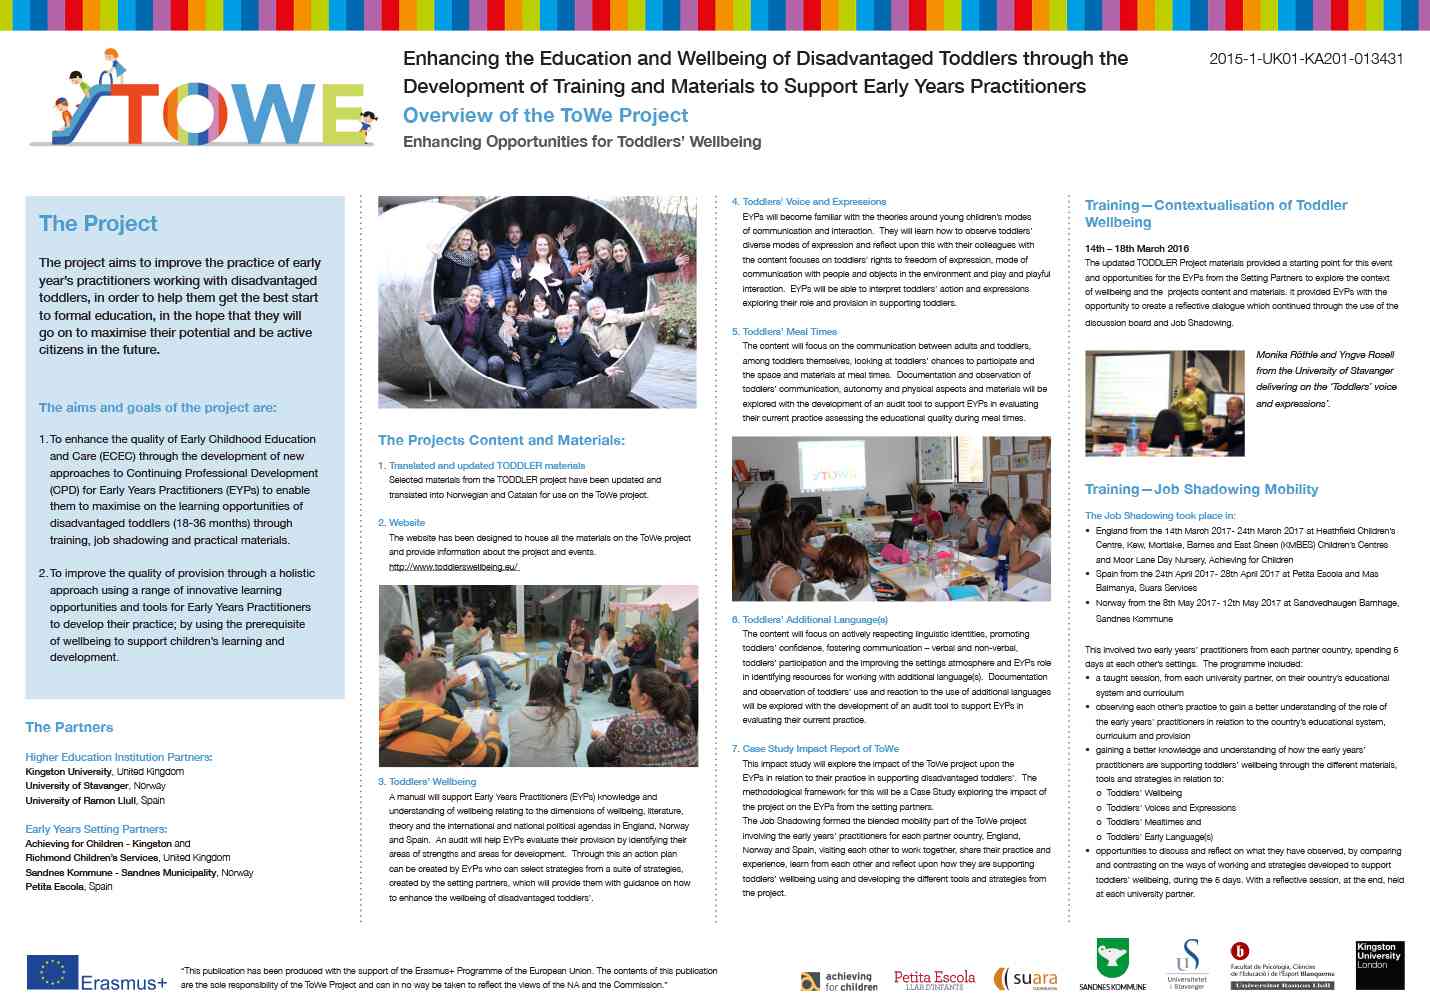 Poster providing an Overview of the ToWe Project - This poster is an information poster providing an overview of the ToWe Project.  It was presented at the ToWe Project's International Workshop/Conference on the 16th March 2018 https://www.toddlerswellbeing.co.uk/